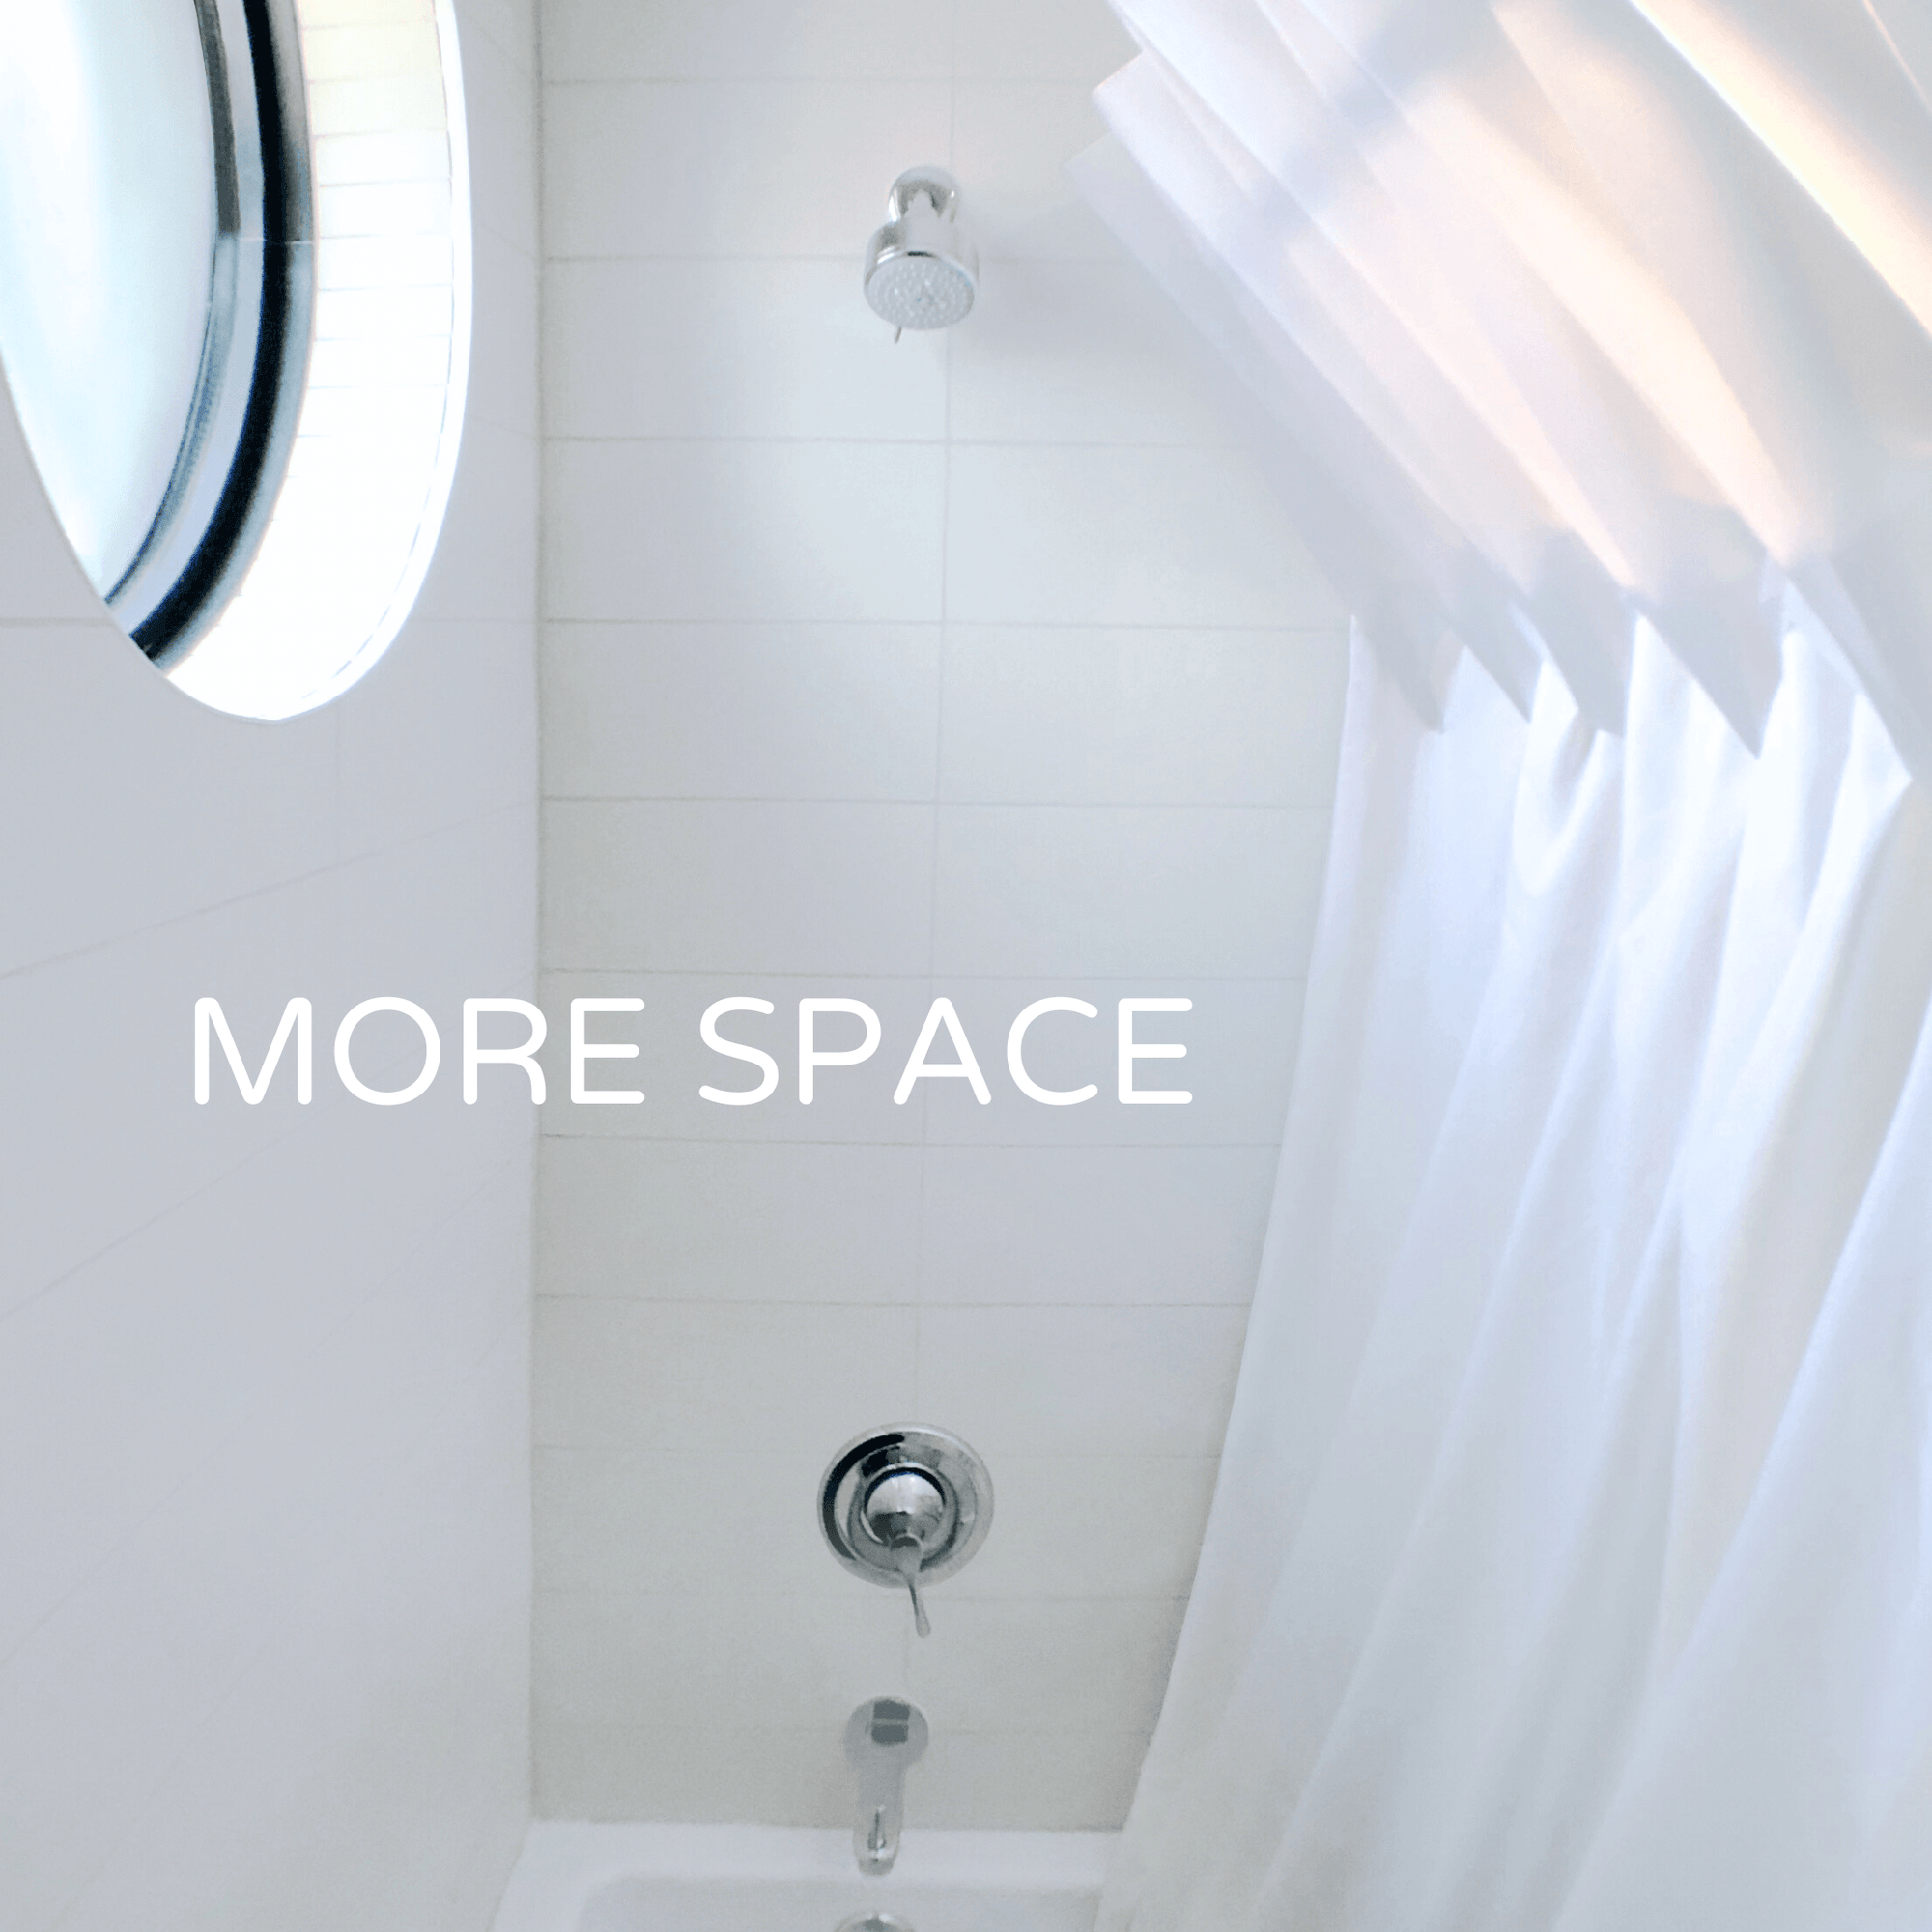 SPACE® Expanding Shower System - More Shower SPACE®